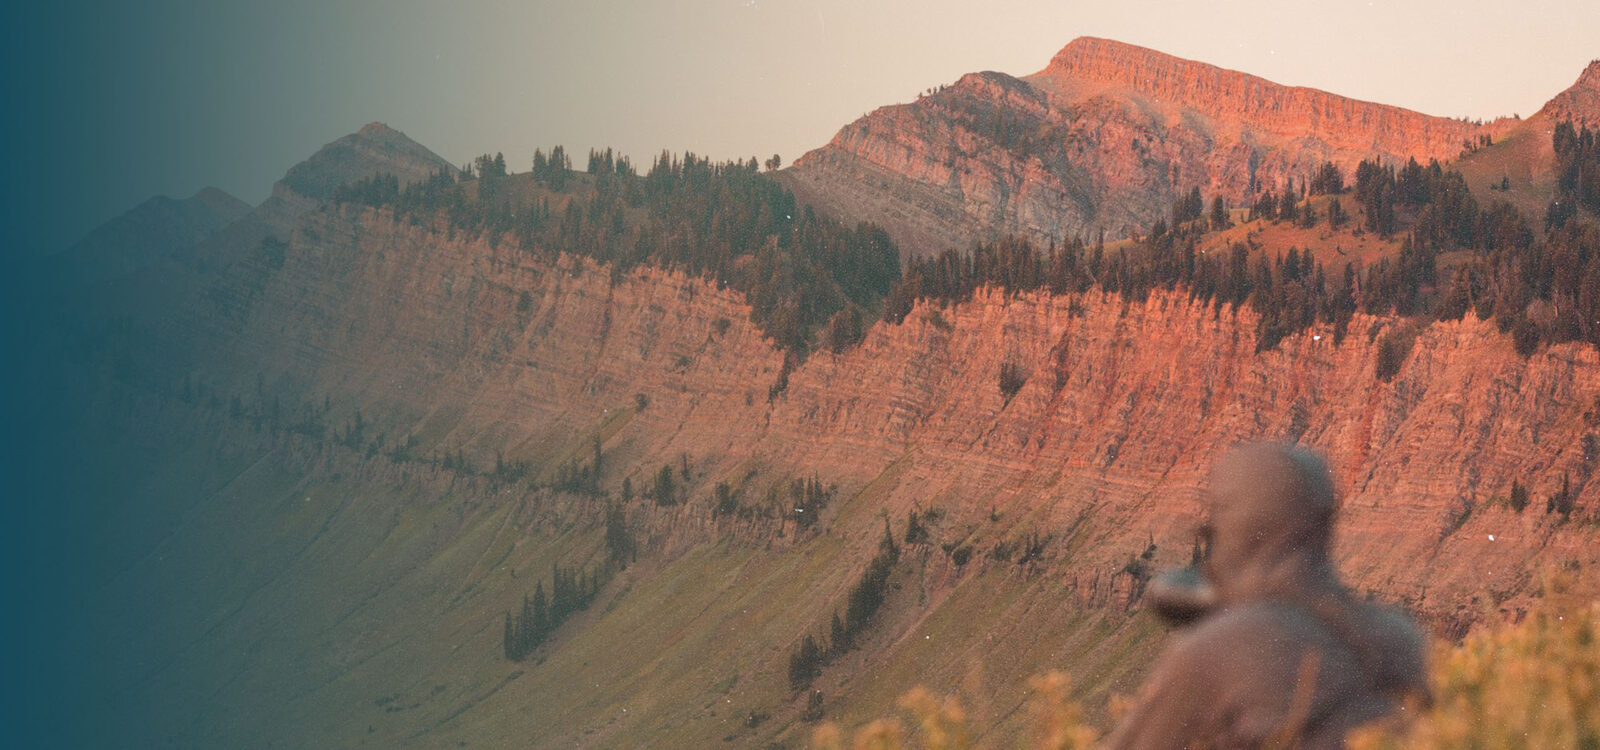 Ridge with red rocks and tree line